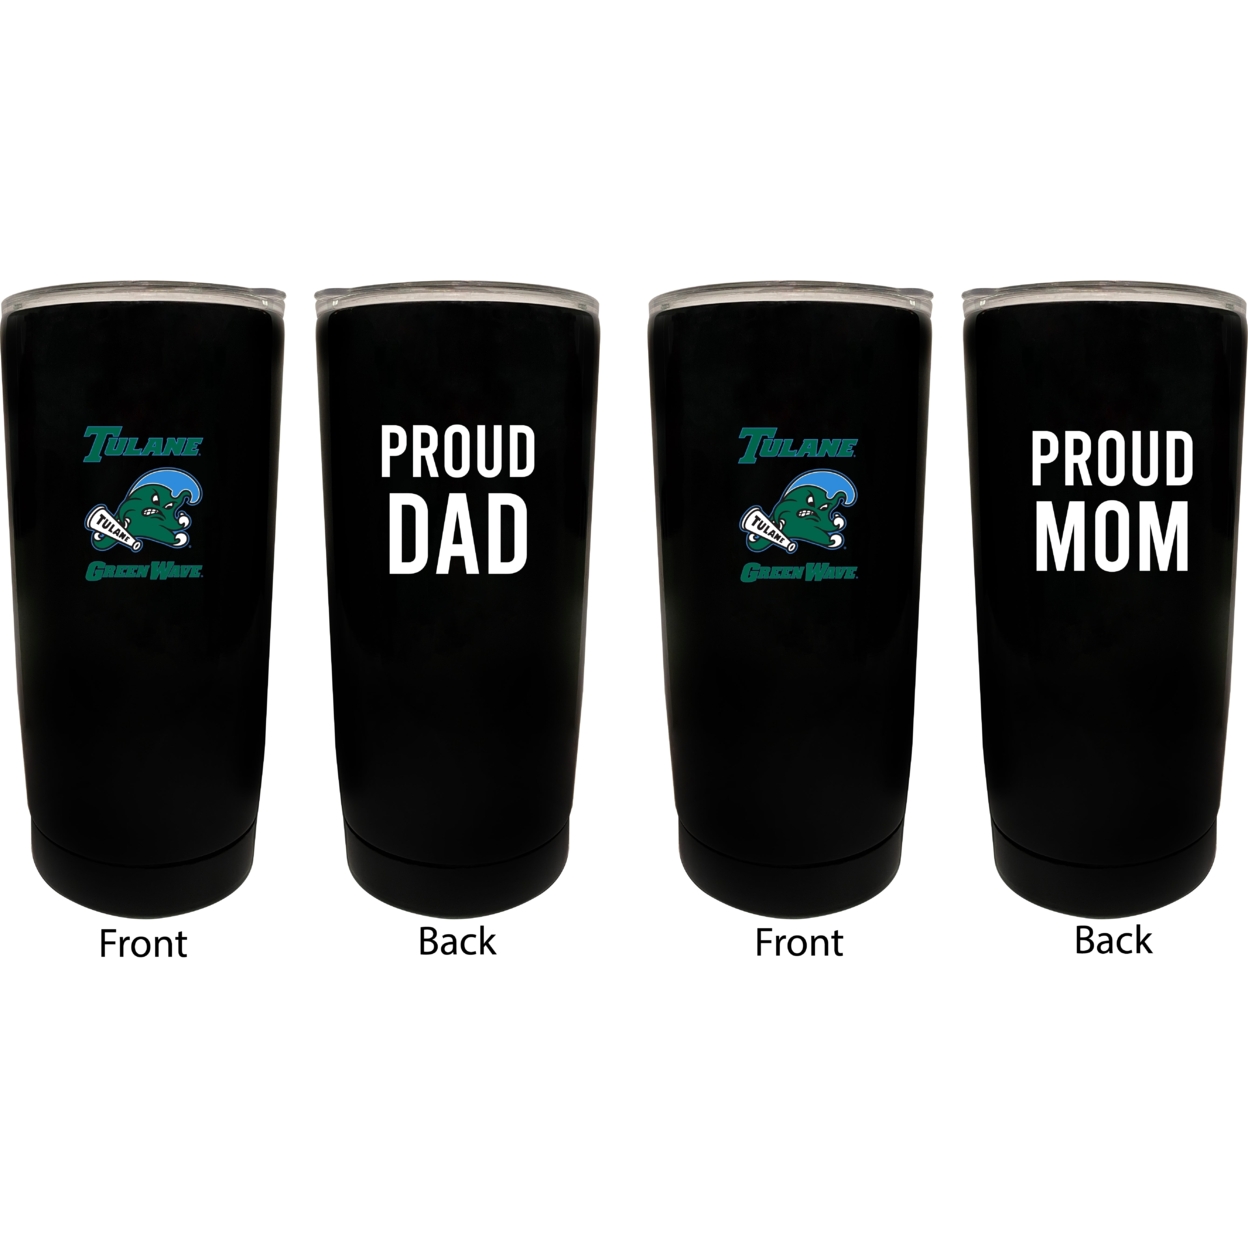 Tulane University Green Wave Proud Mom And Dad 16 Oz Insulated Stainless Steel Tumblers 2 Pack Black.